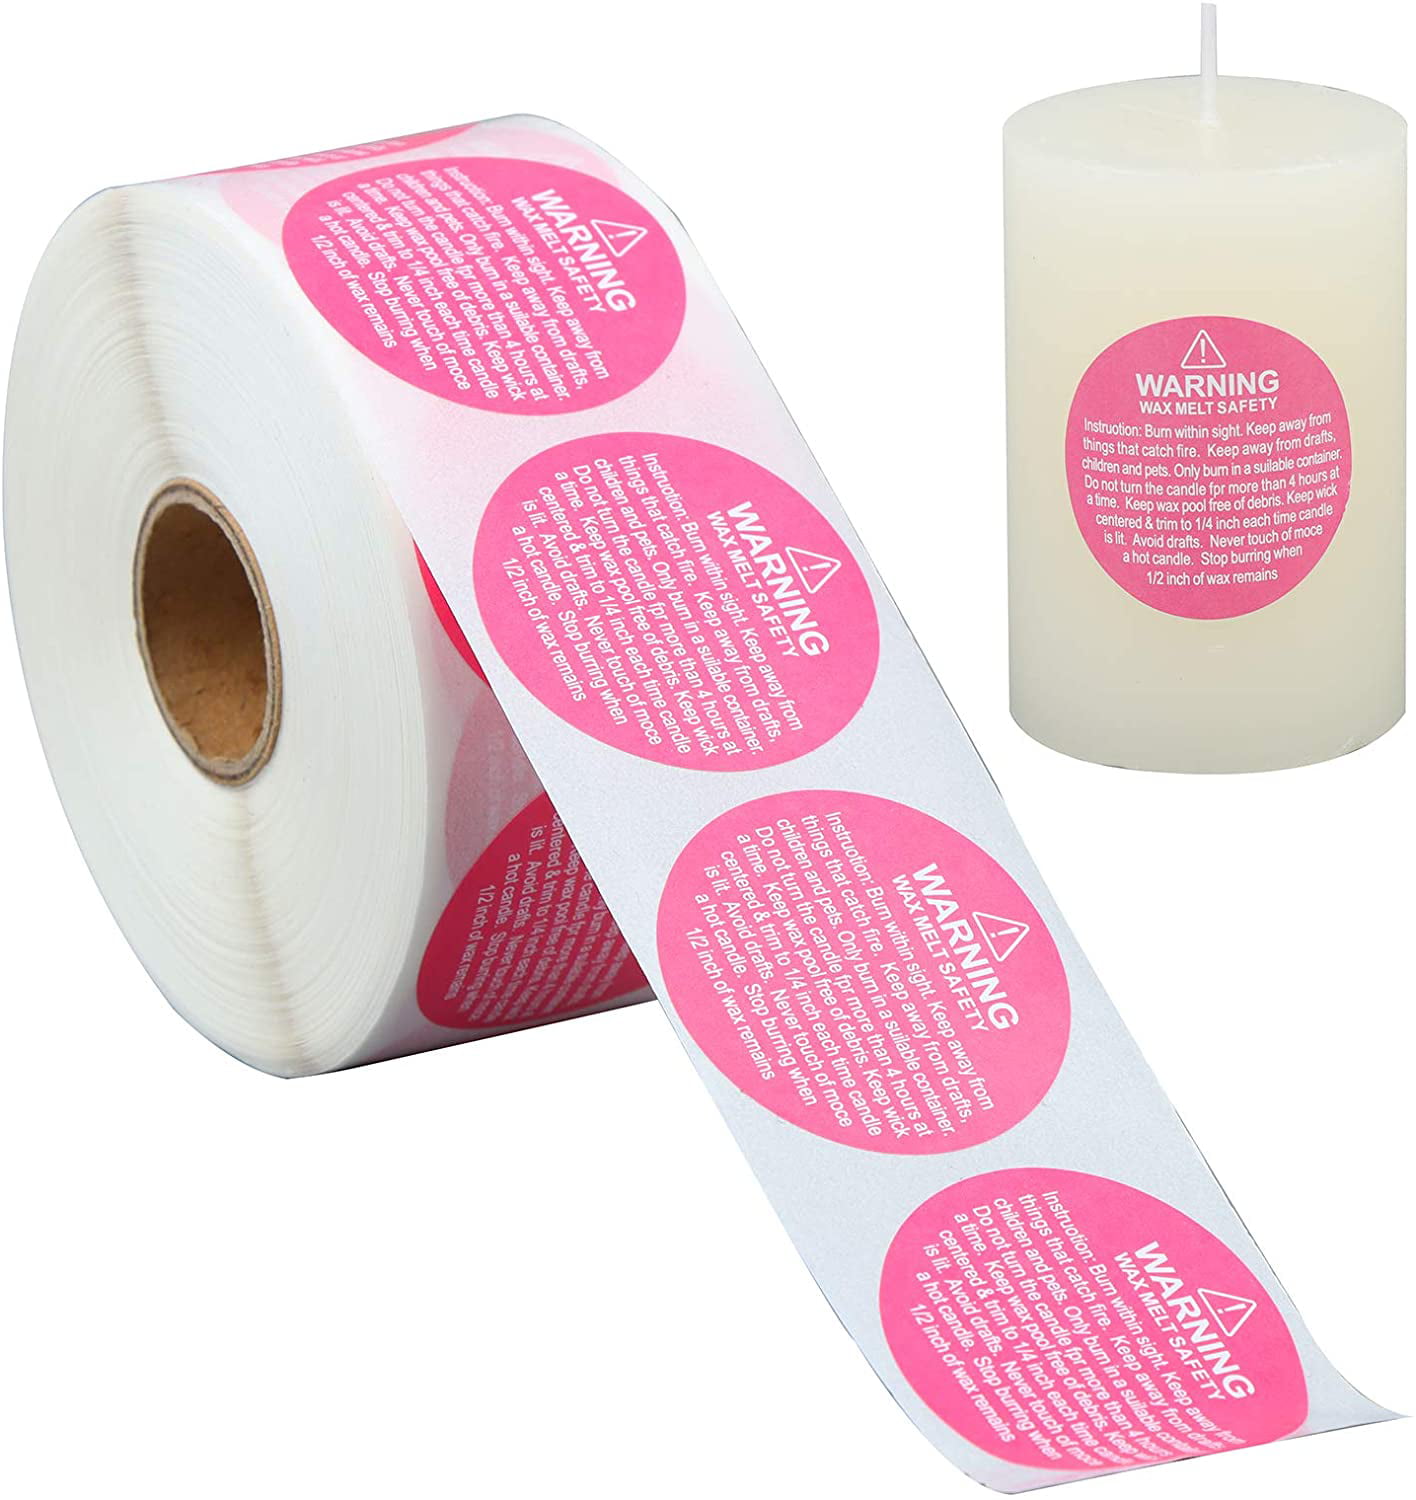 color2 1000Pcs Candle Warning Labels 1.8 inch Candle Jar Container Stickers Waterproof Wax Labels Sticker Decal for Candle Jars,Tins and Votives Random Color 